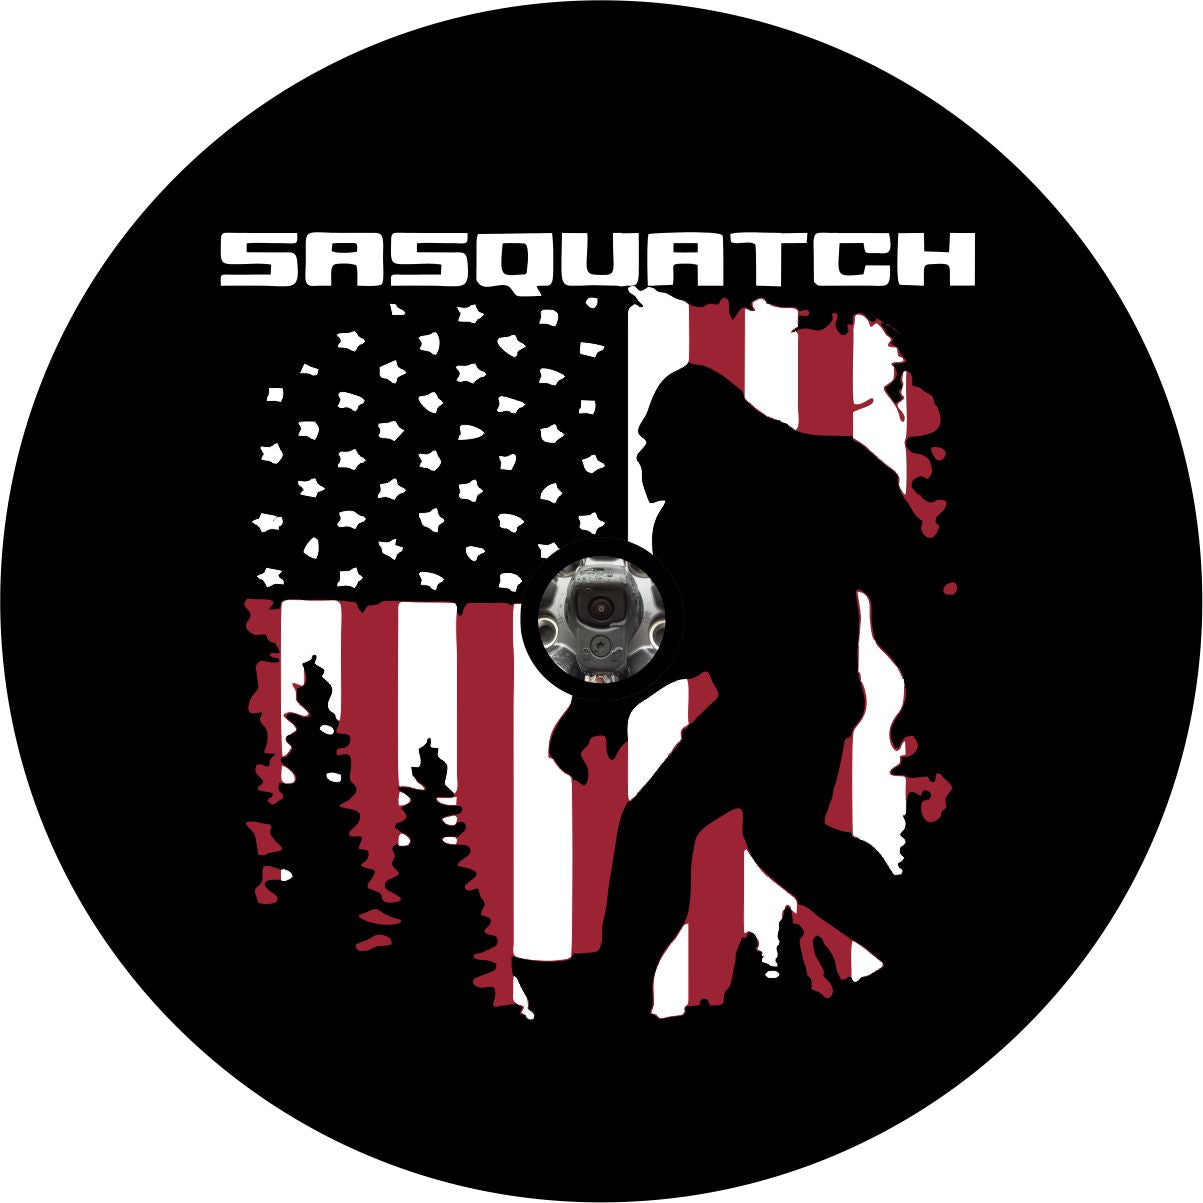 Sasquatch spare tire cover for Jeep, Bronco, campers, RV, van, and more. This spare tire cover design has Bigfoot walking through the forest with a rustic old glory, the American flag, as the background and the name Sasquatch written across the top. with a hole for a back up camera